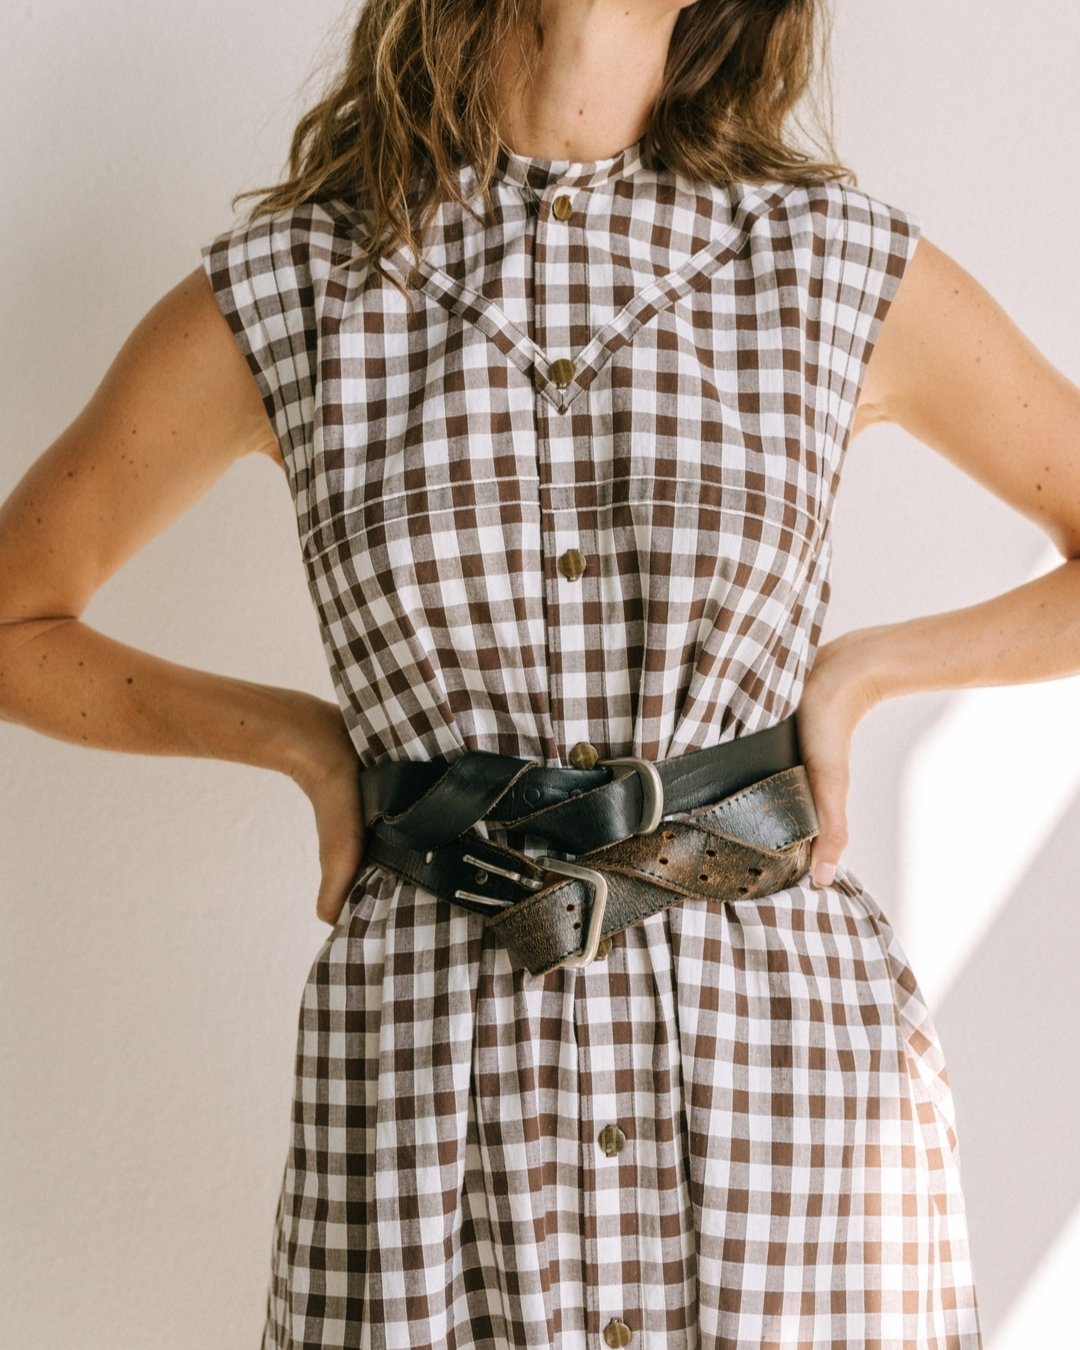 Dress up with a blazer and flats for town, or down with a belt and boots for a rodeo. Matched with 1920s checked Corozo buttons for a sustainable touch. History, reimagined for modern wear. 

#sustainablebrand #upcycledfashionbrand #sustainablefashio